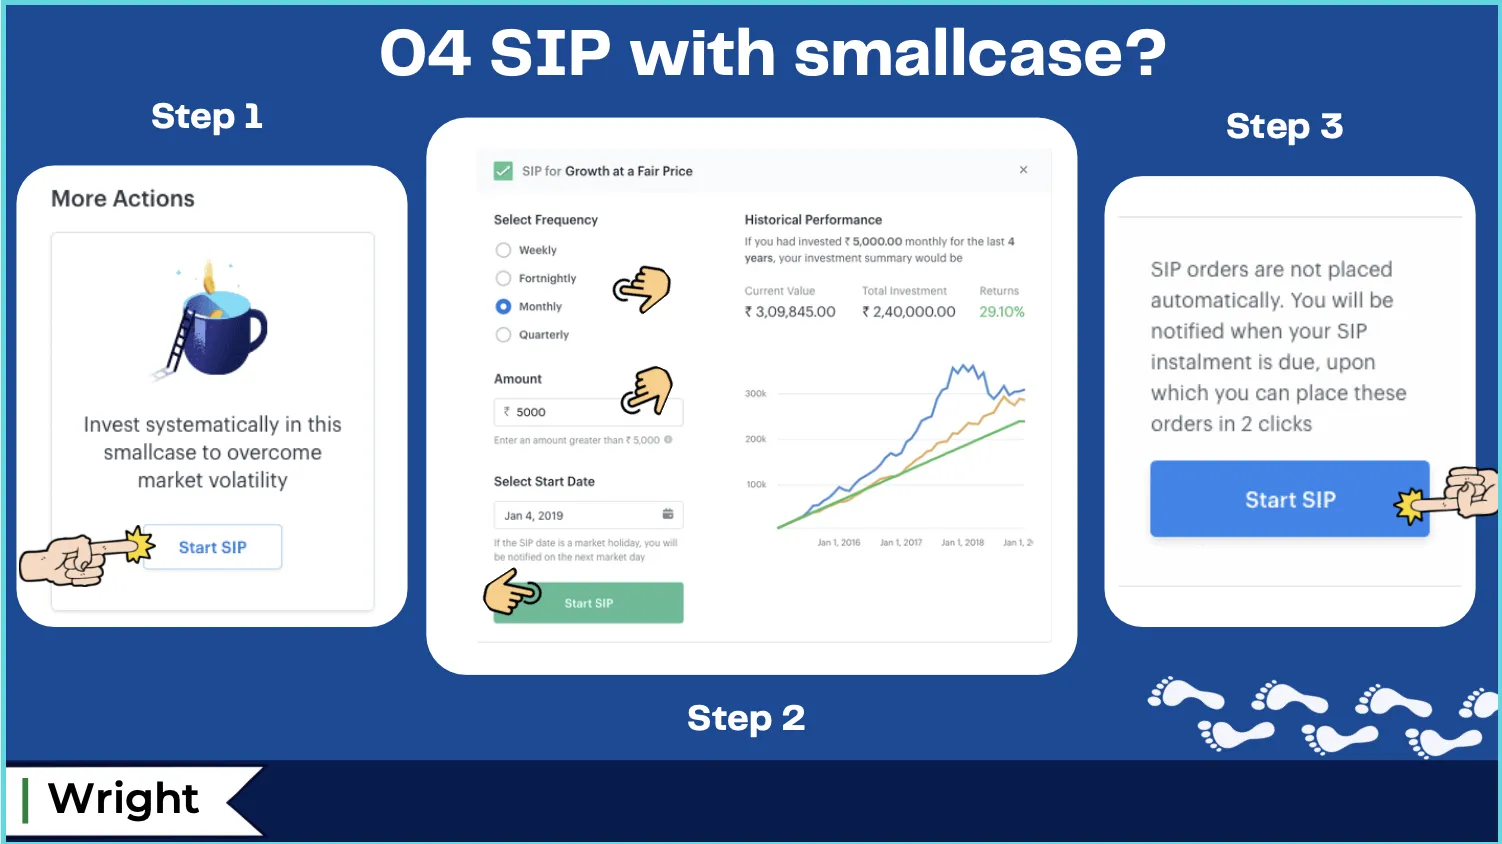 How to Start SIP with Smallcase